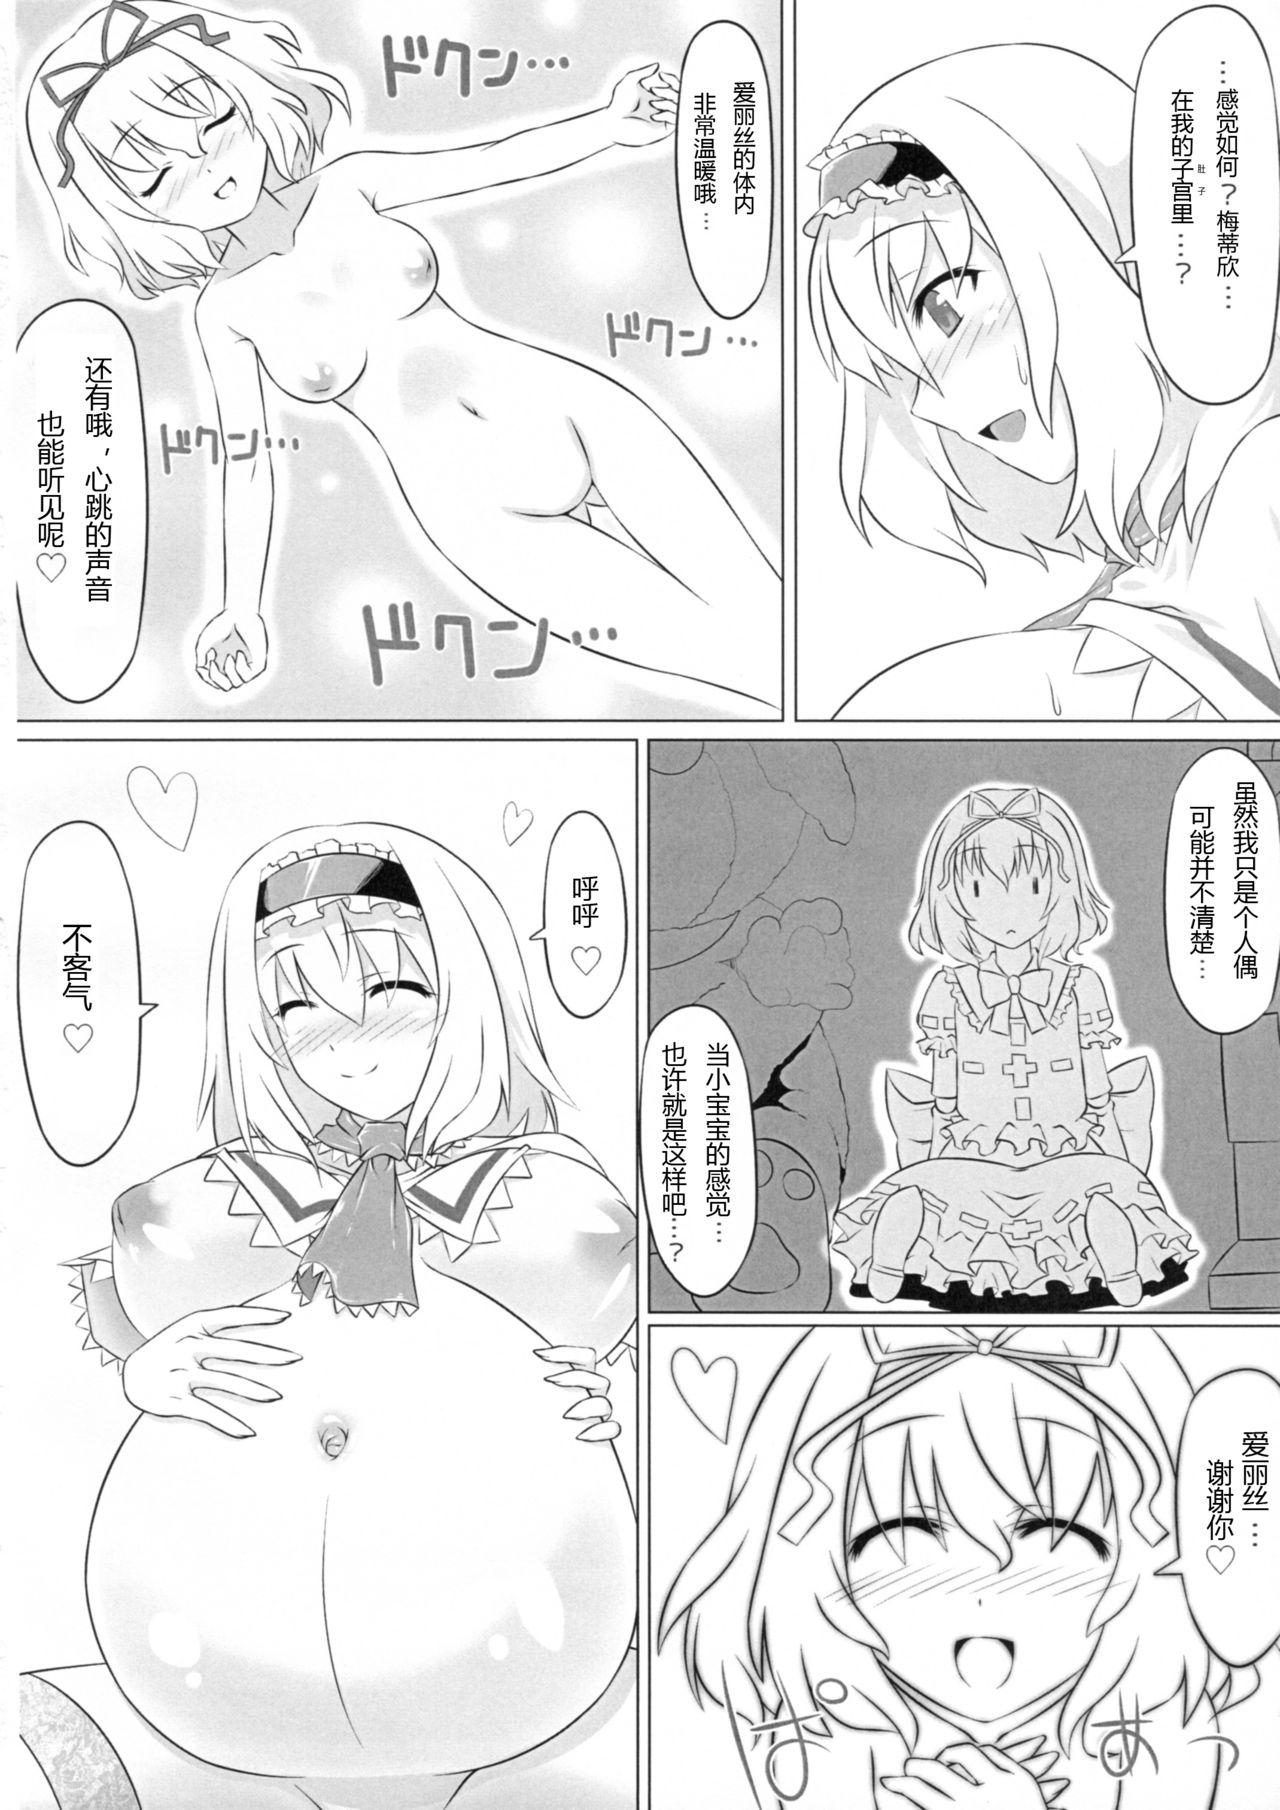 Wank IN TO DELIRIUM - Touhou project Celebrity Nudes - Page 10